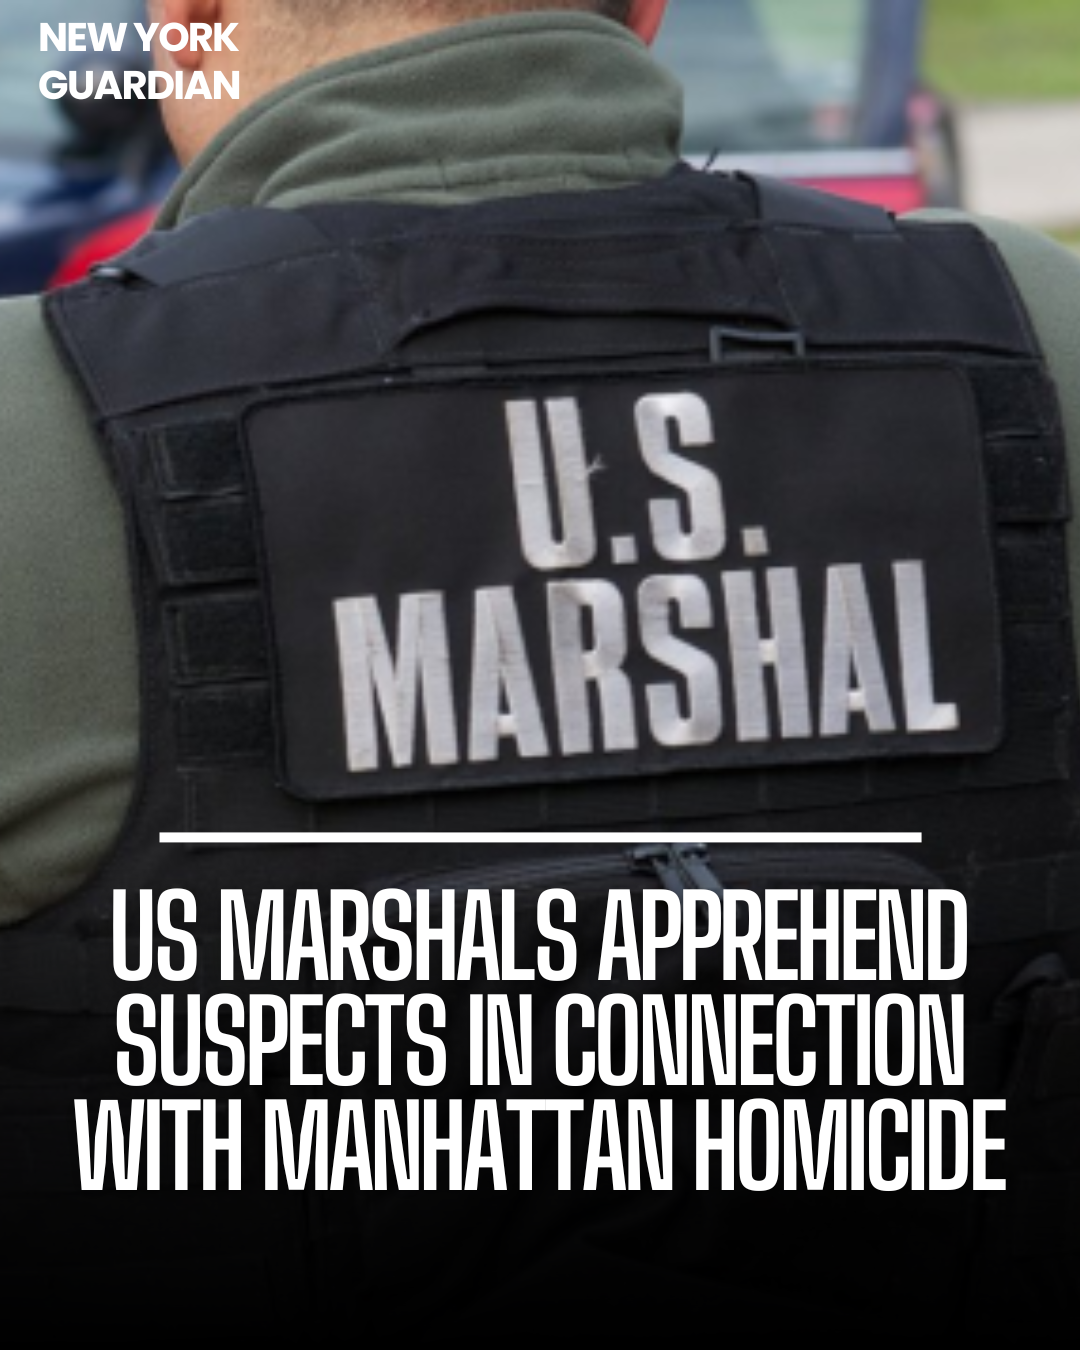 The US Marshals Regional Fugitive Task Force successfully captured two individuals in York, Pennsylvania.